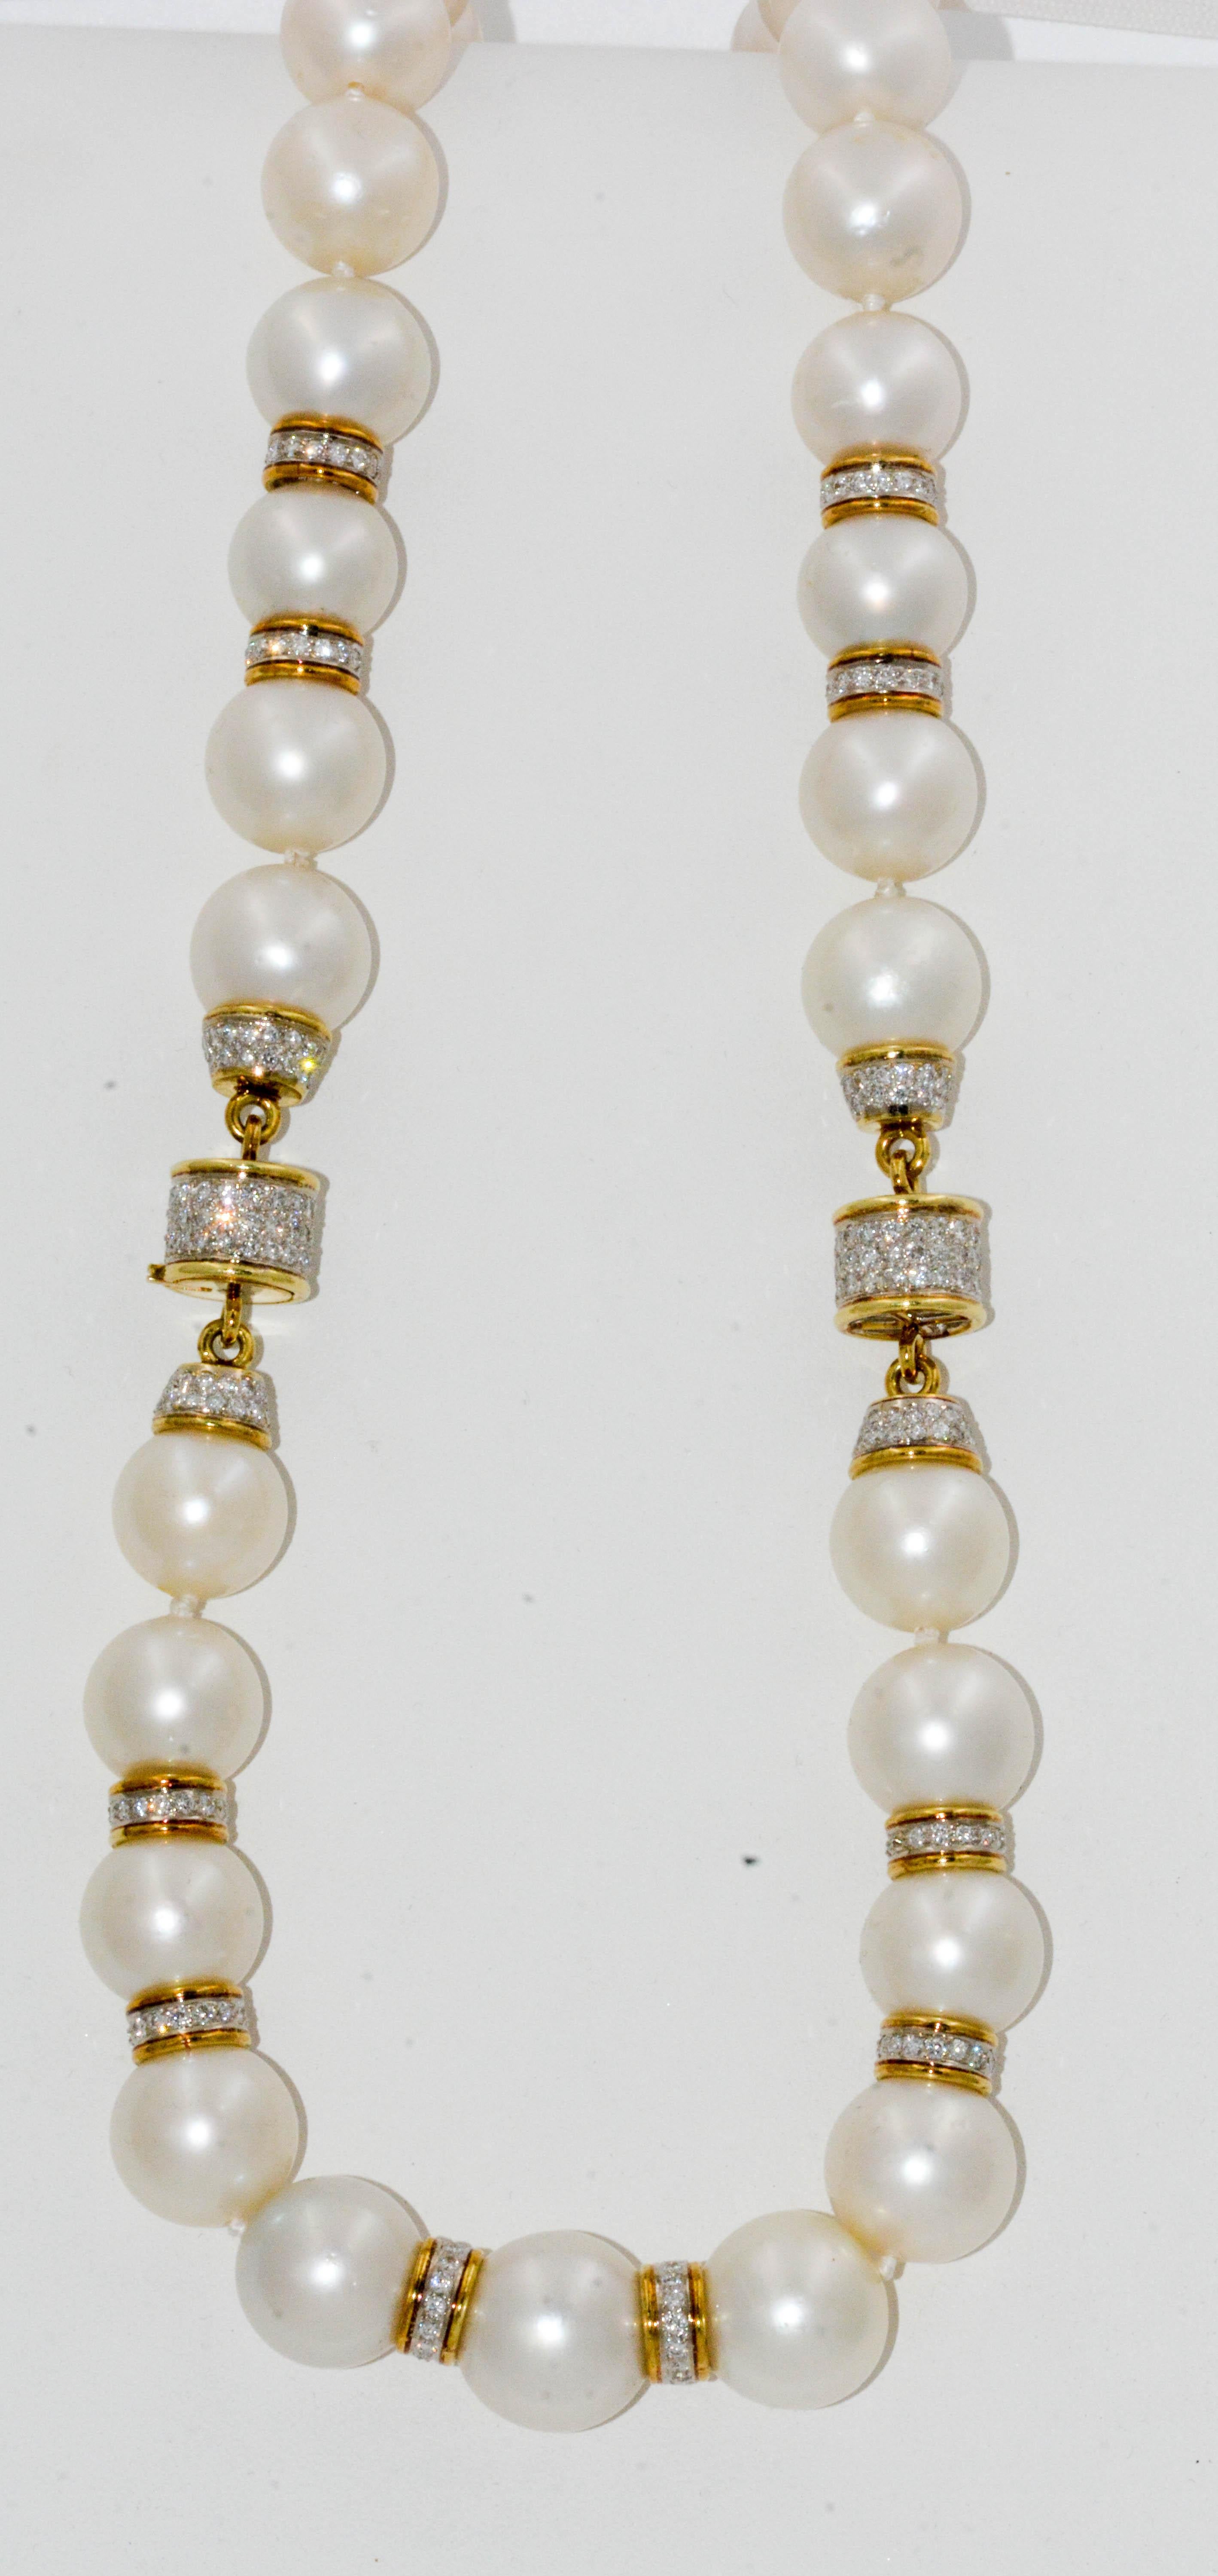 baroque pearls with gold and diamond rondelles